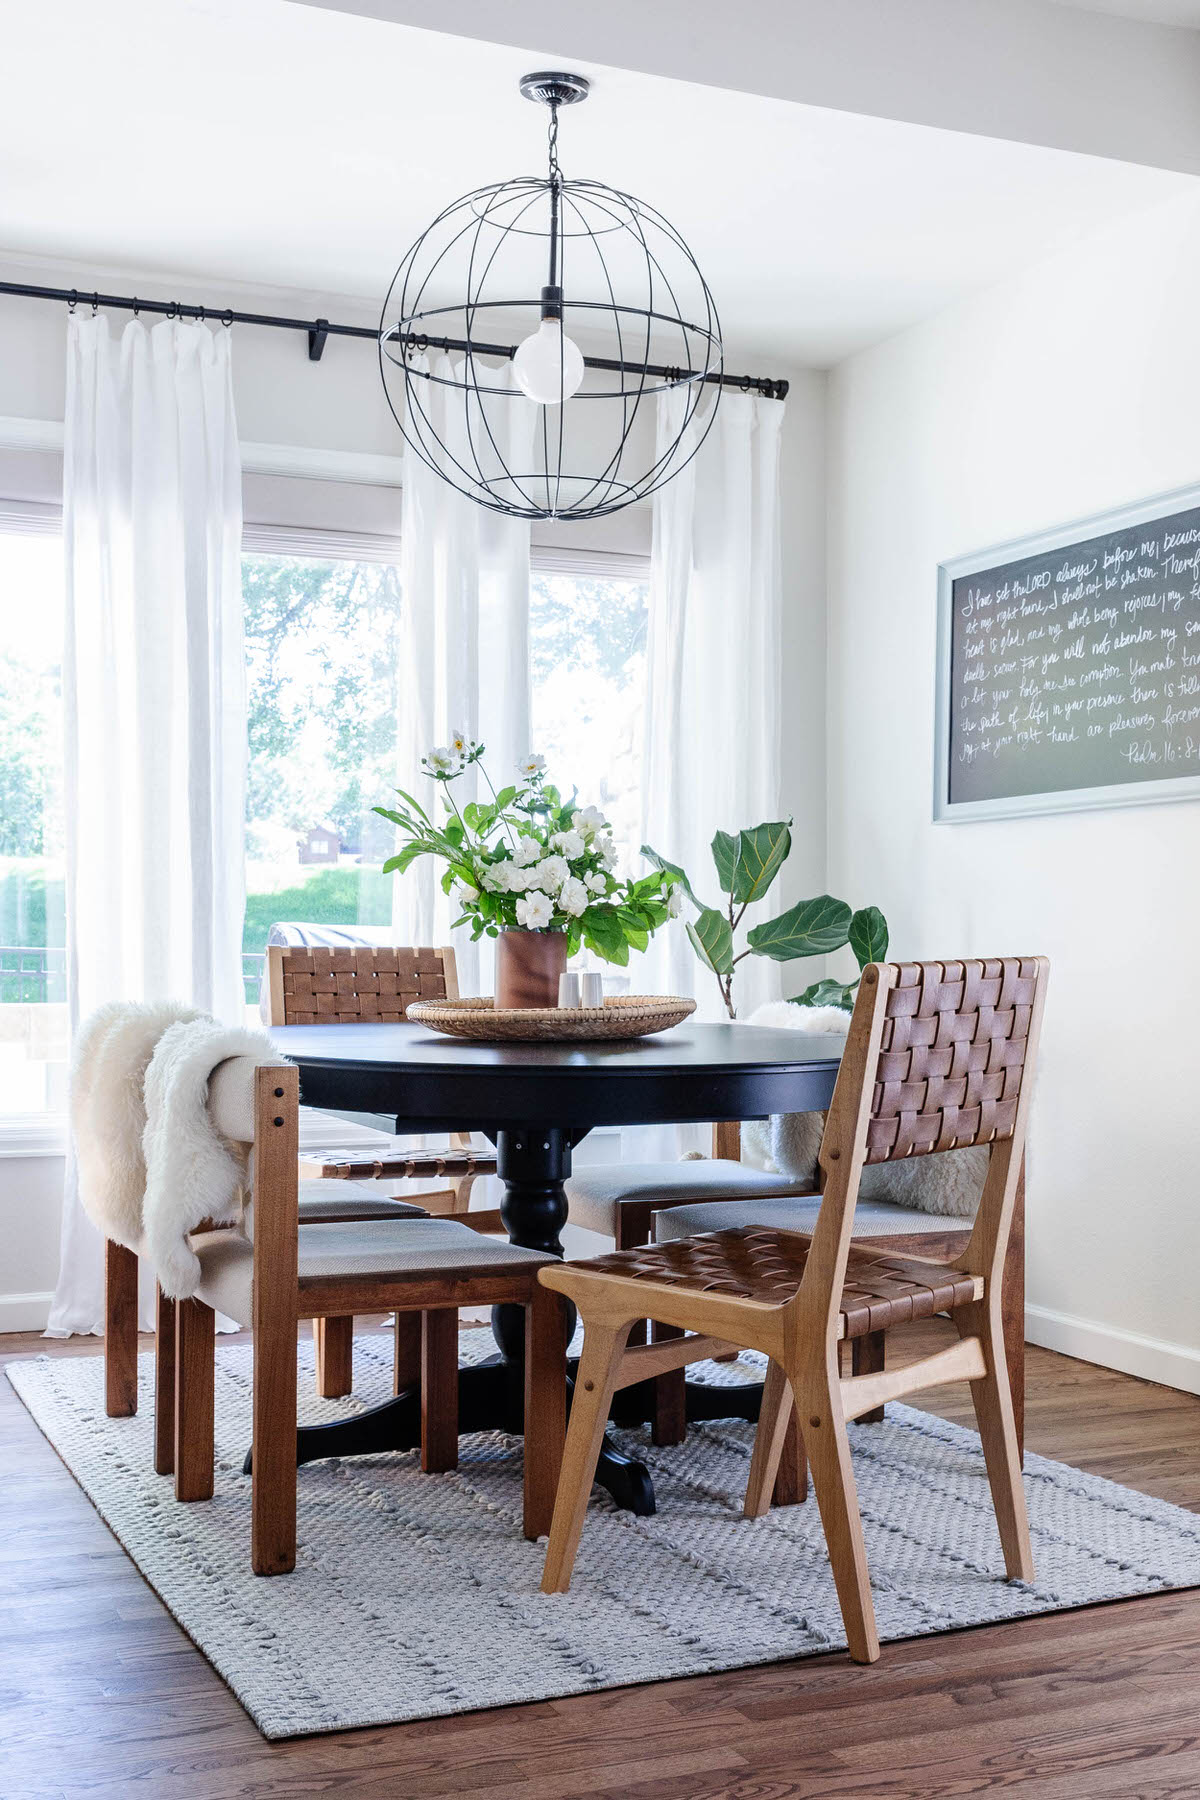 California Casual, Warm White Kitchen and Dining, Breakfast Nook, Warm Organic Modern Home by Peggy Haddad Interiors